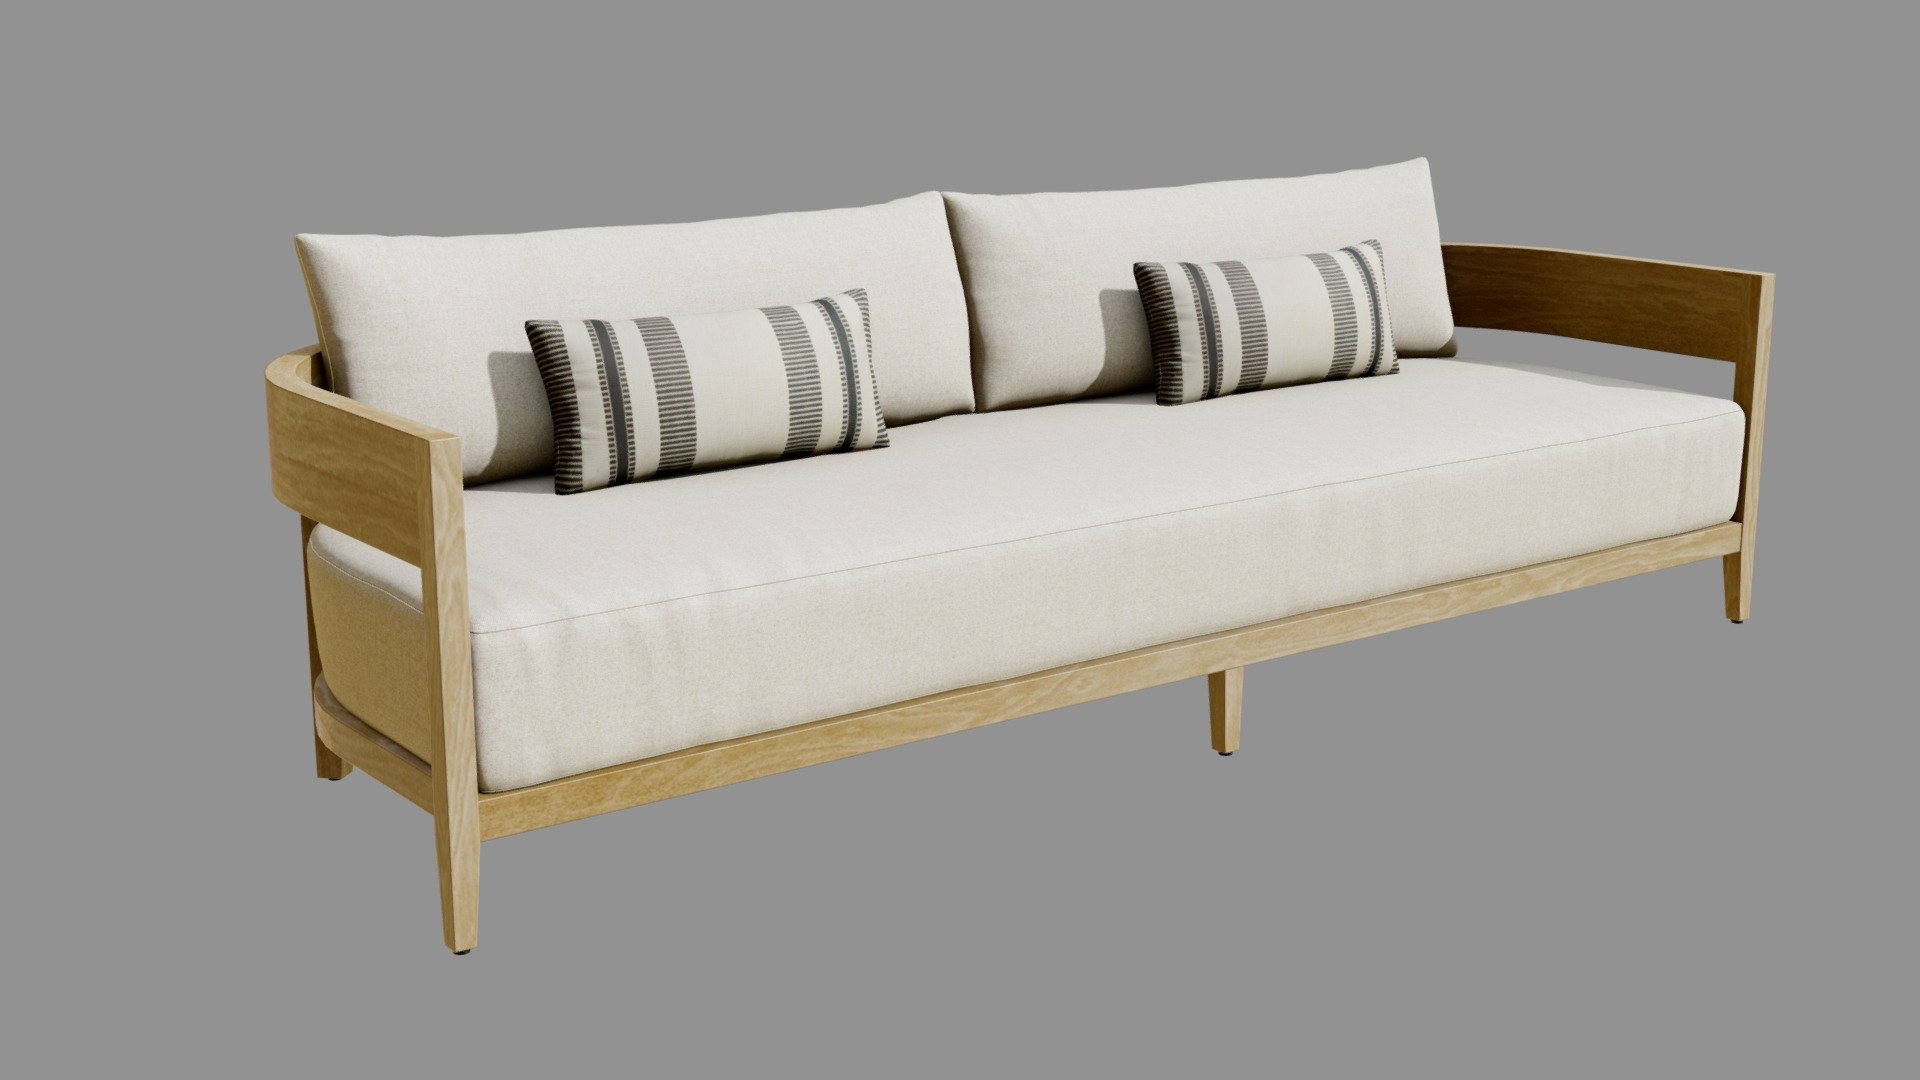 High-quality 3d model of a Restoration Hardware Balmain Outdoor Sofa

14659 polygons
15022 vertices - Restoration Hardware Balmain Sofa - Buy Royalty Free 3D model by 3detto 3d model